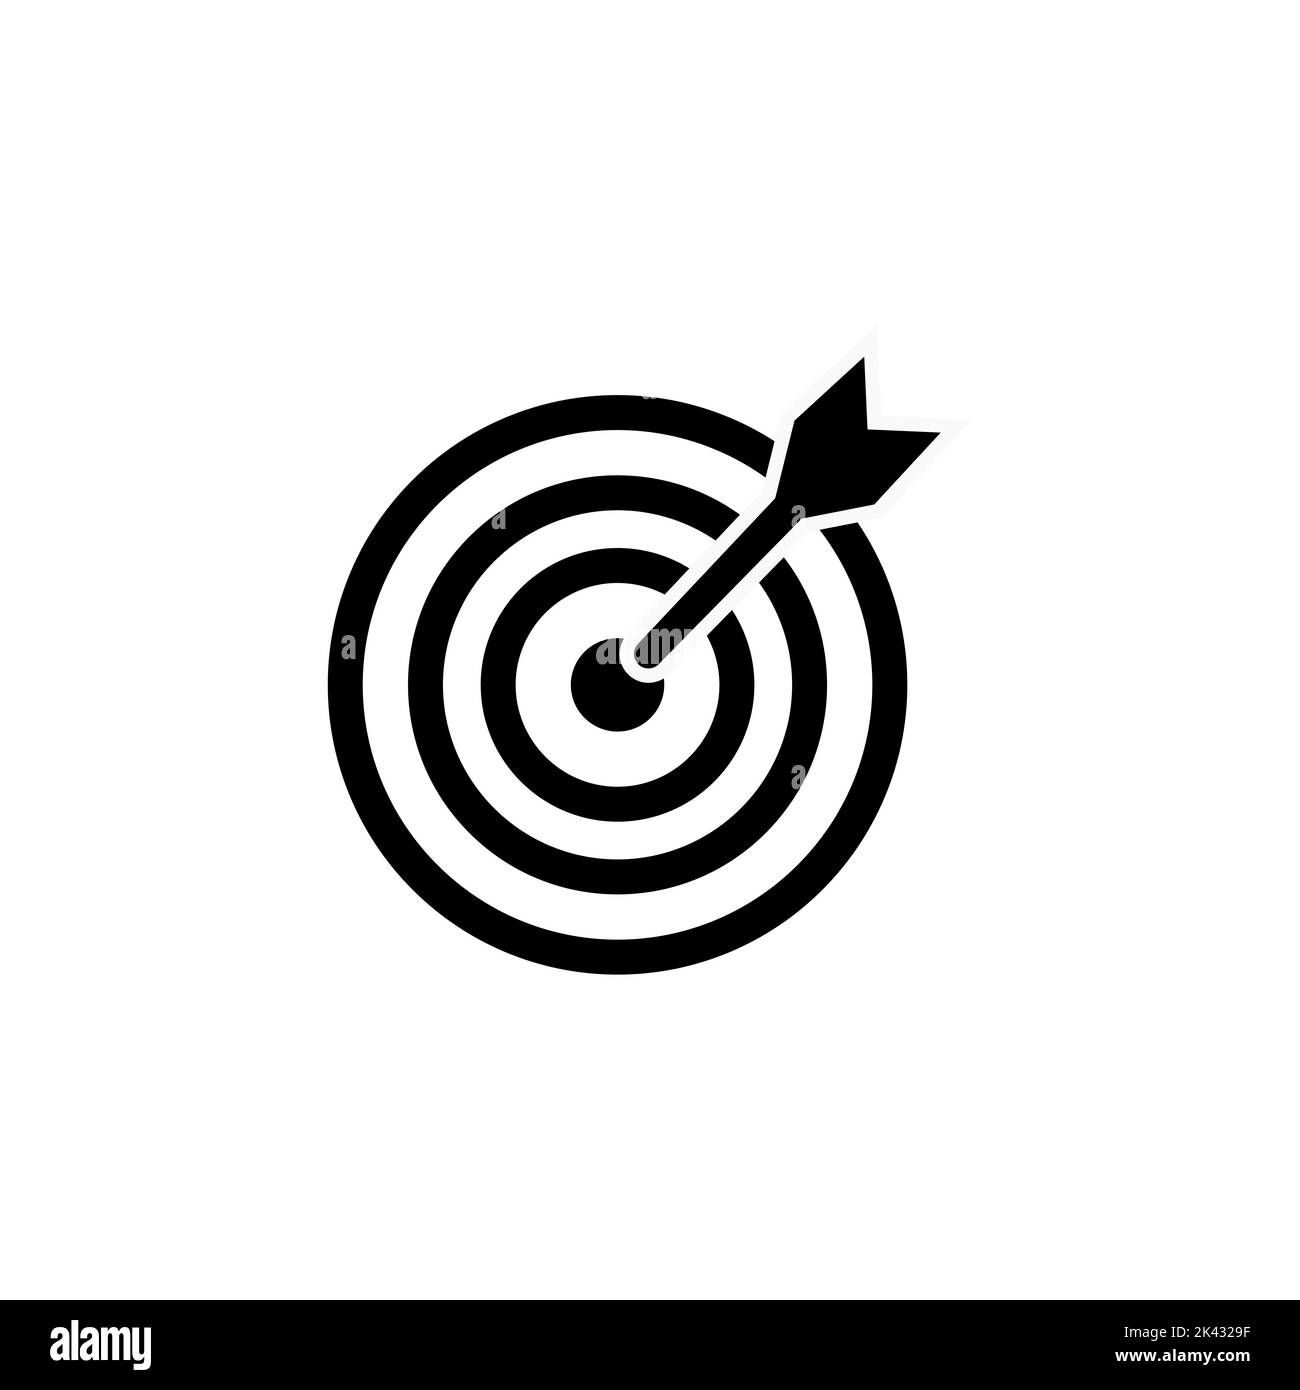 Target bullseye arrow icon flat for apps and websites. Illustration isolated on white background. Stock Vector